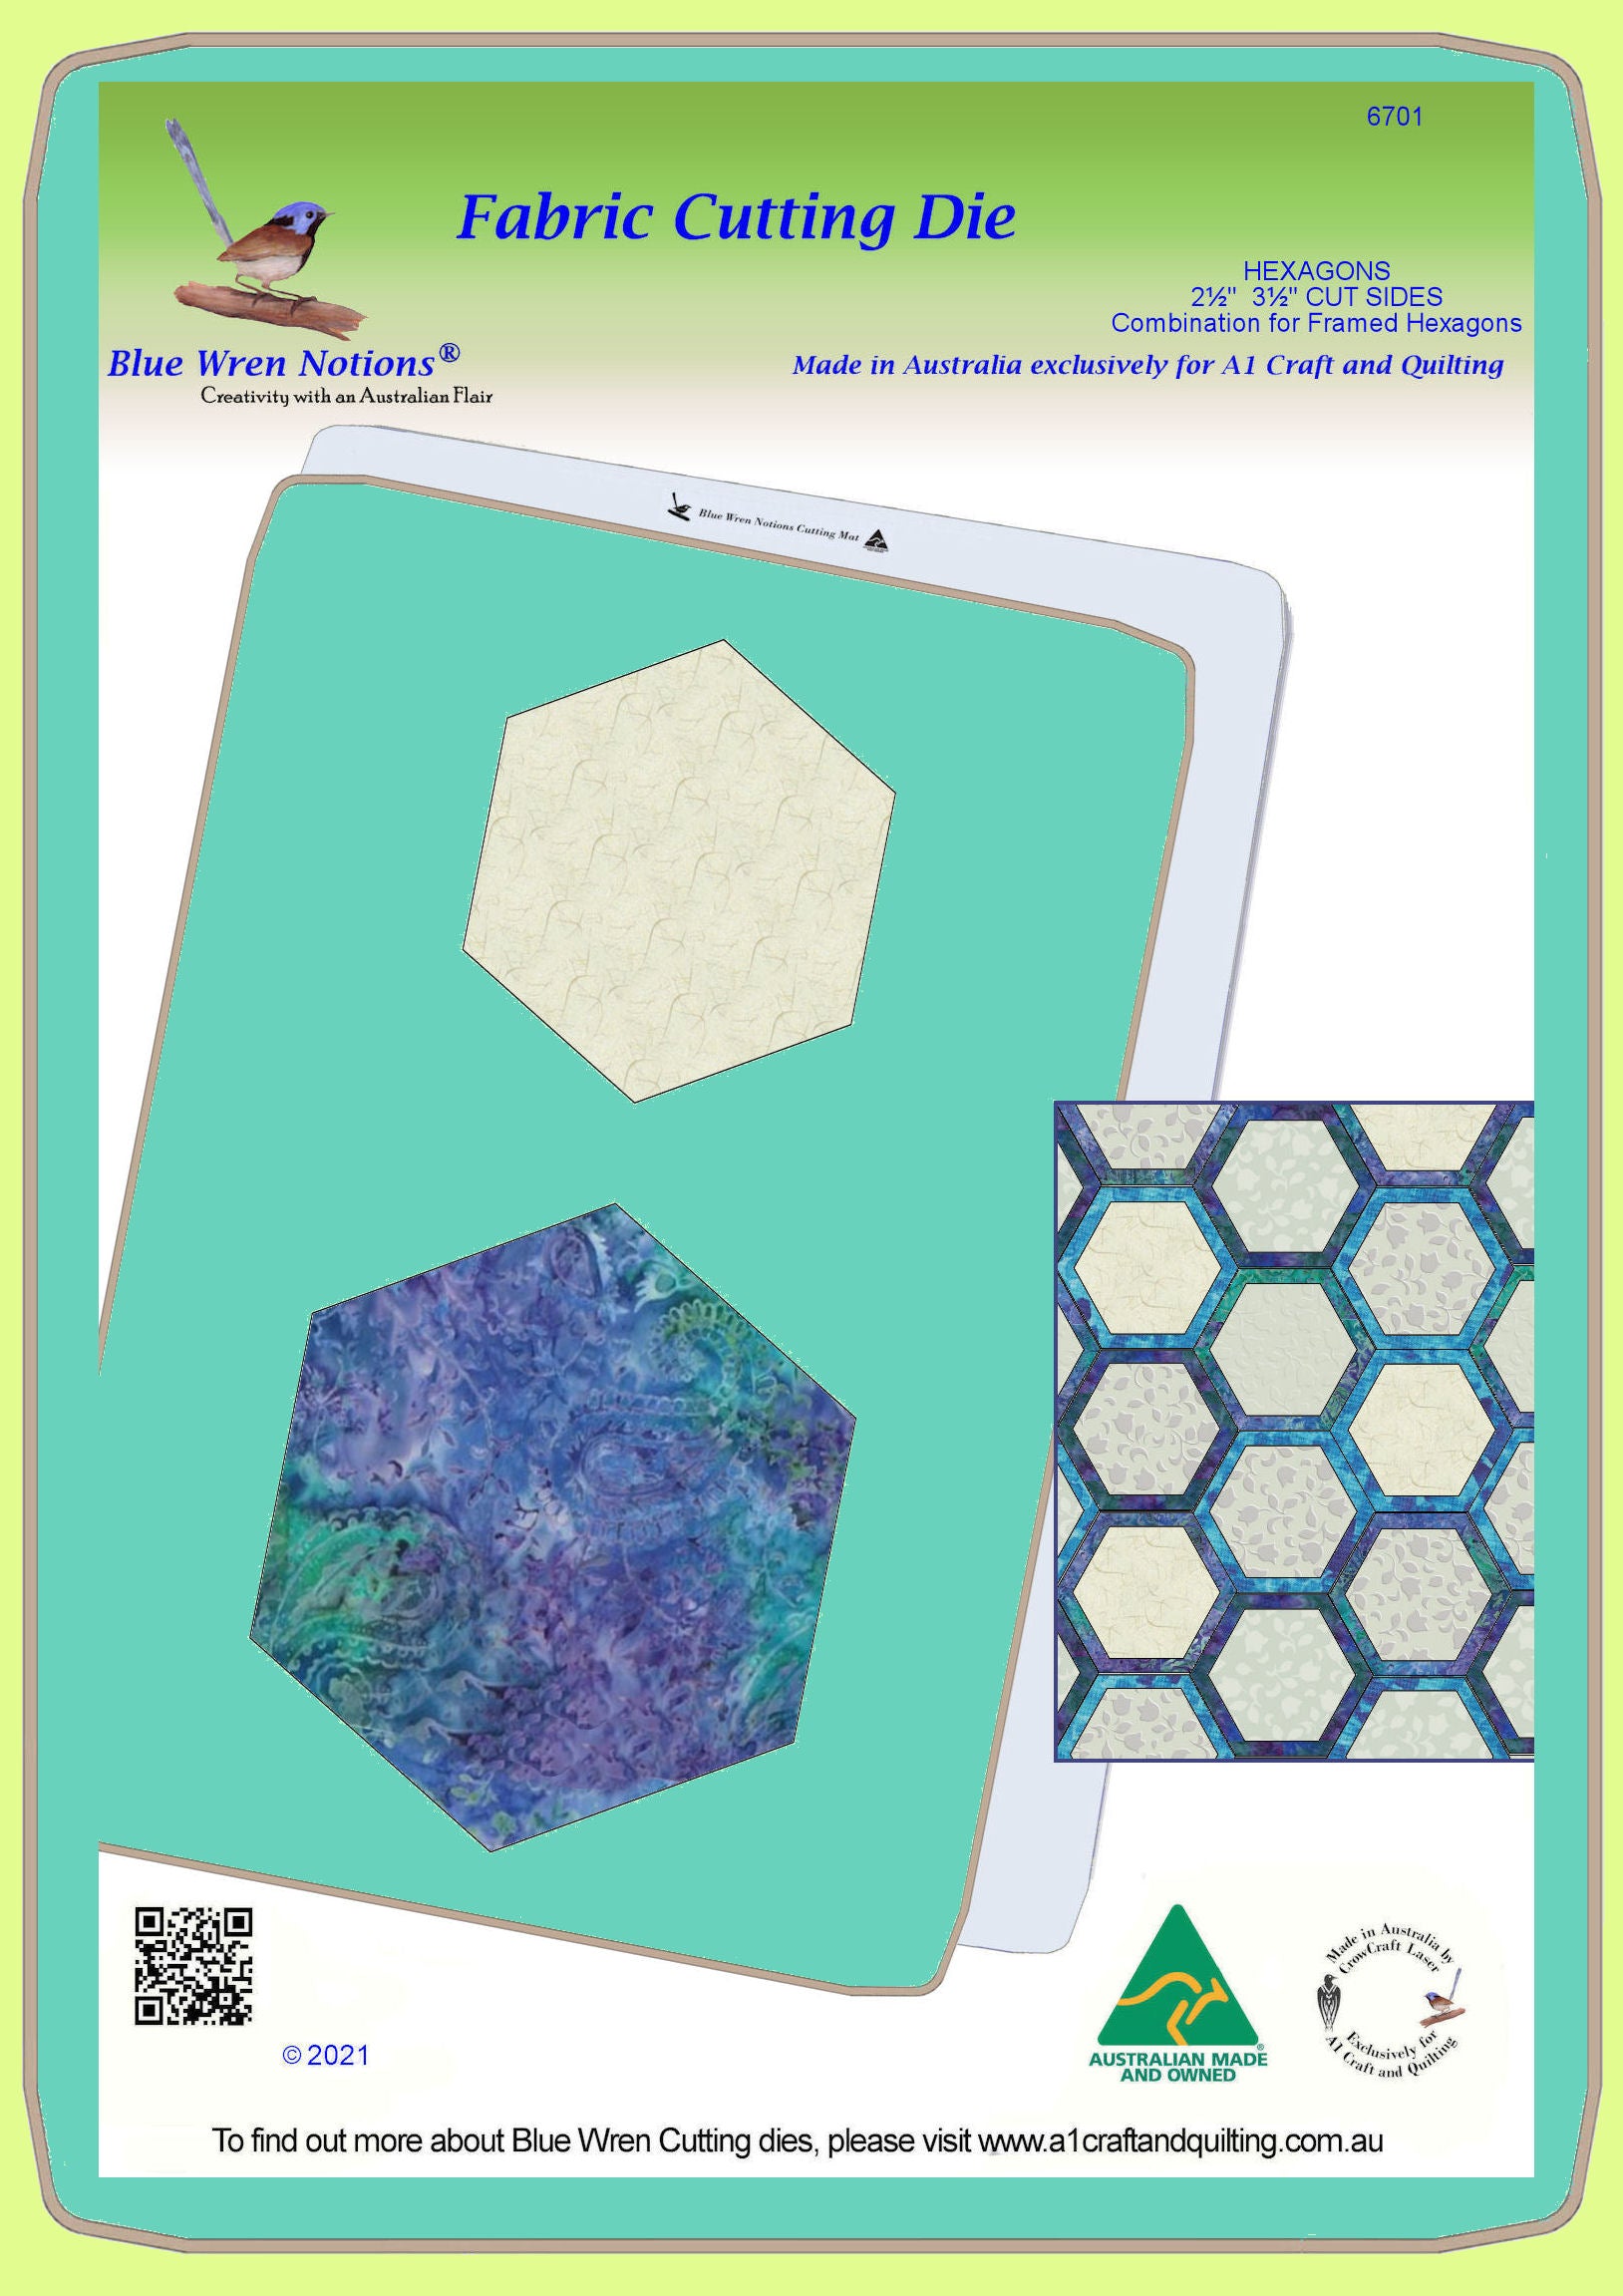 Hexagon Set, 2½" and 3½" cut sides combo for framed hexagons - 6701